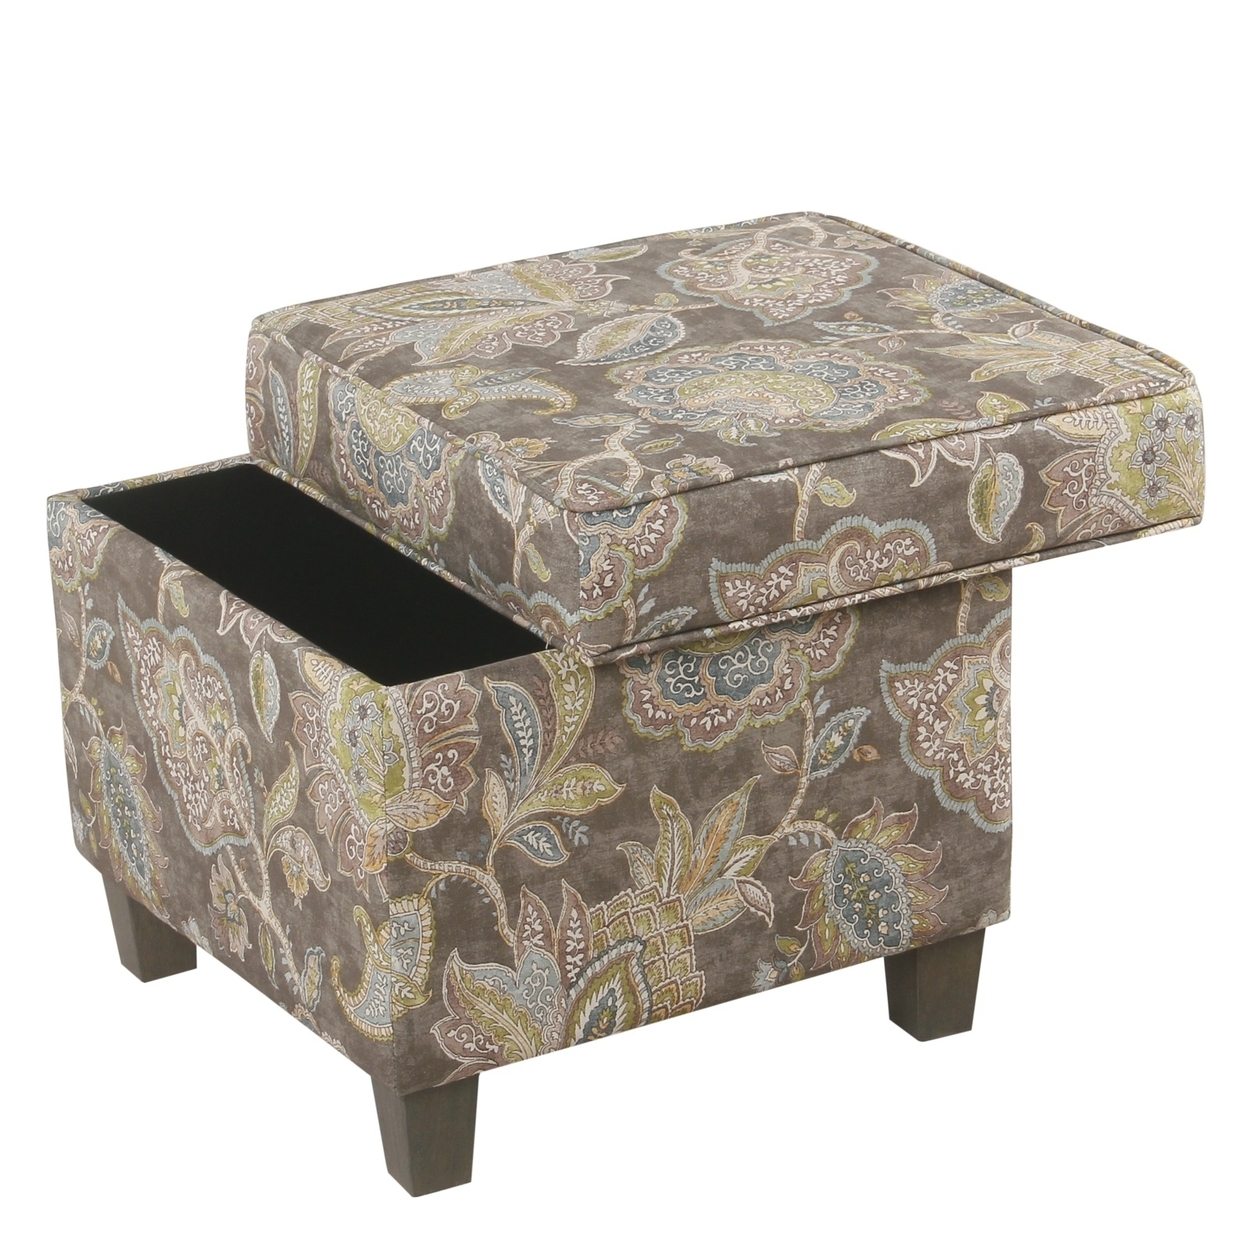 Floral Pattern Fabric Upholstered Wooden Ottoman With Lift Off Top And Tapered Feet, Multicolor- Saltoro Sherpi